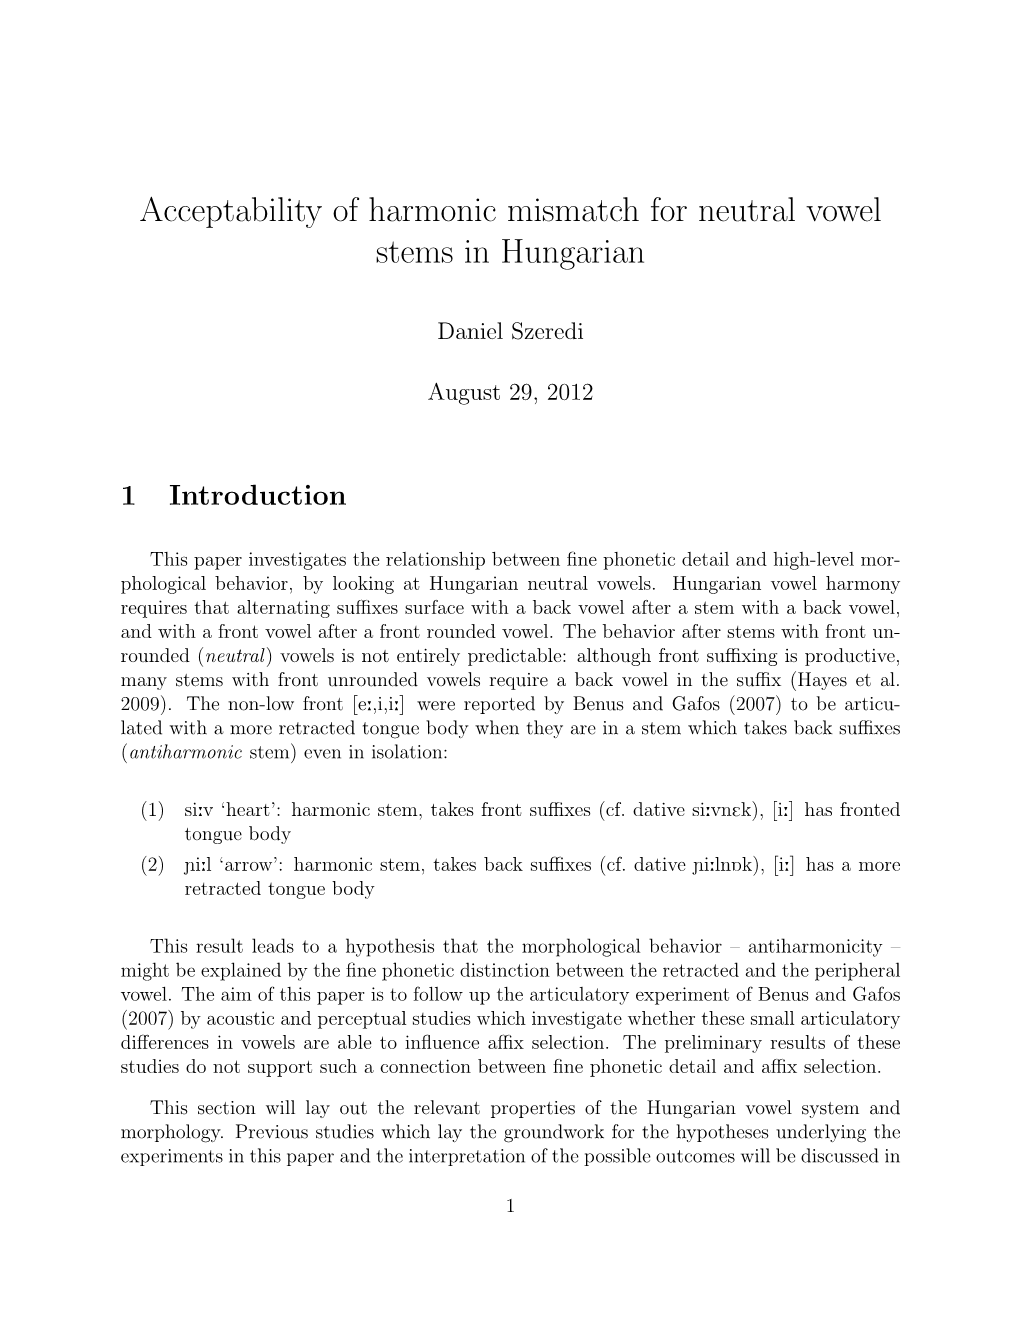 Acceptability of Harmonic Mismatch for Neutral Vowel Stems in Hungarian